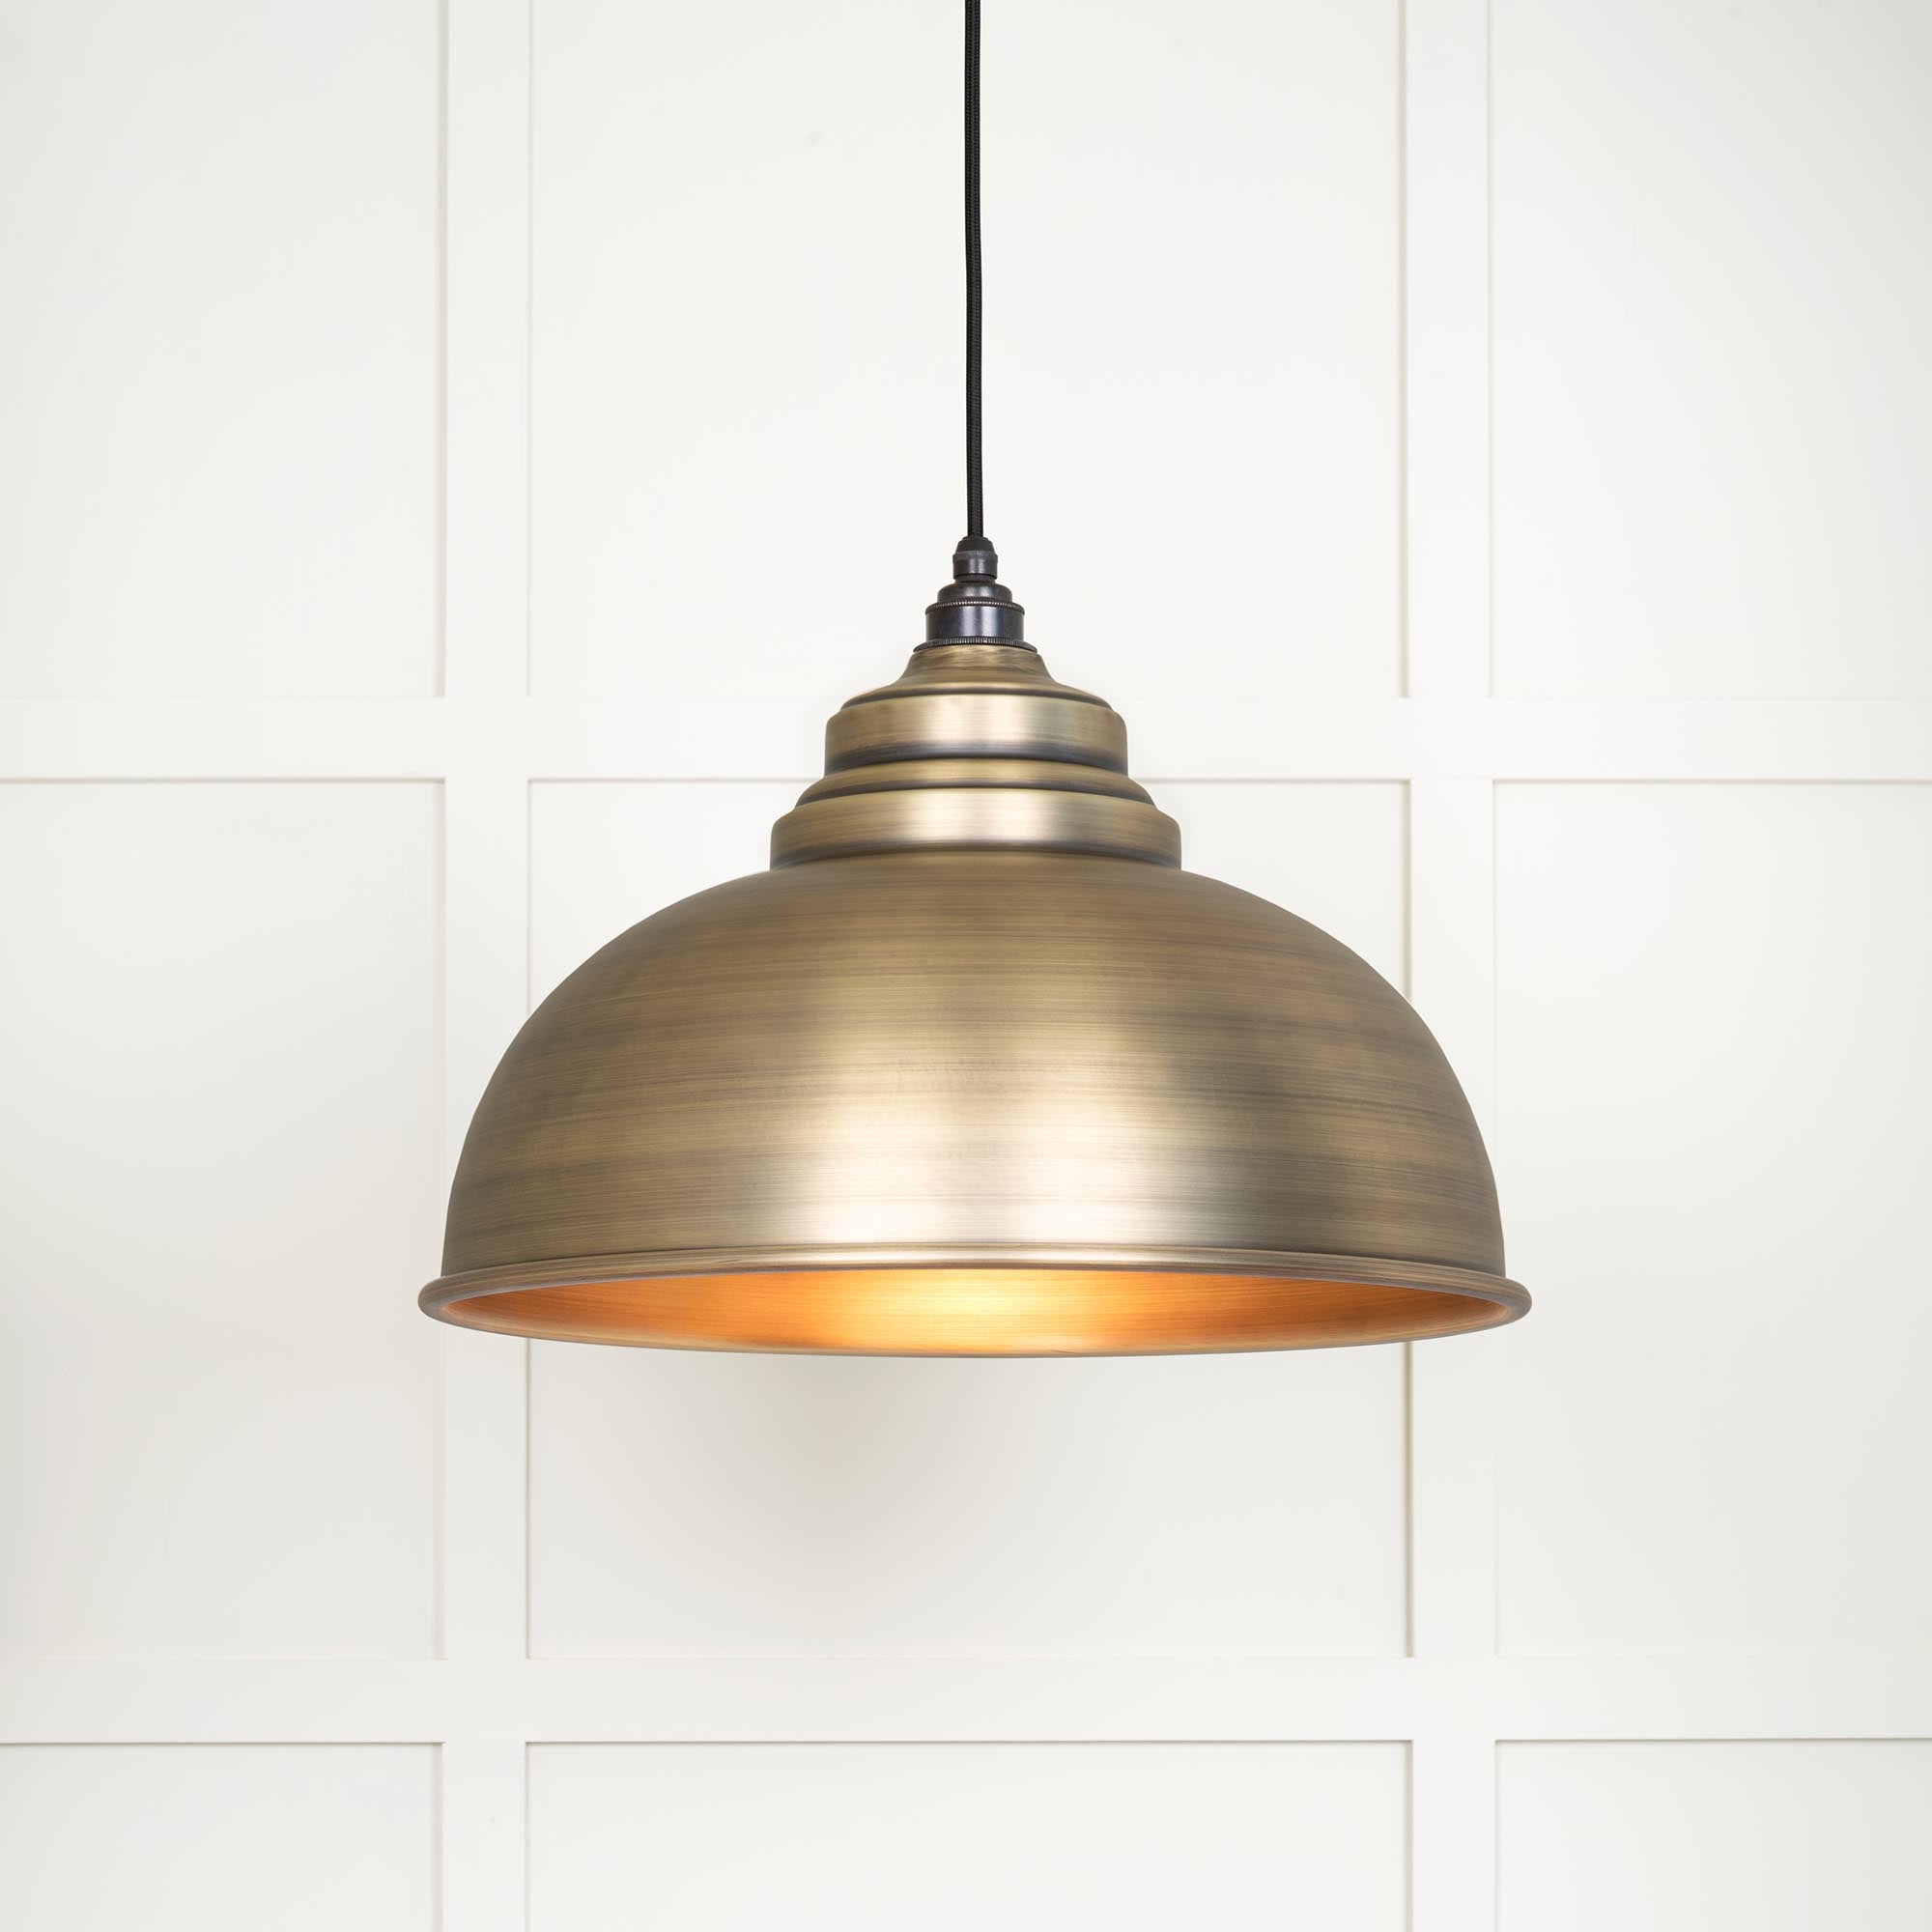 Image of Harborne Ceiling Light in Aged Brass